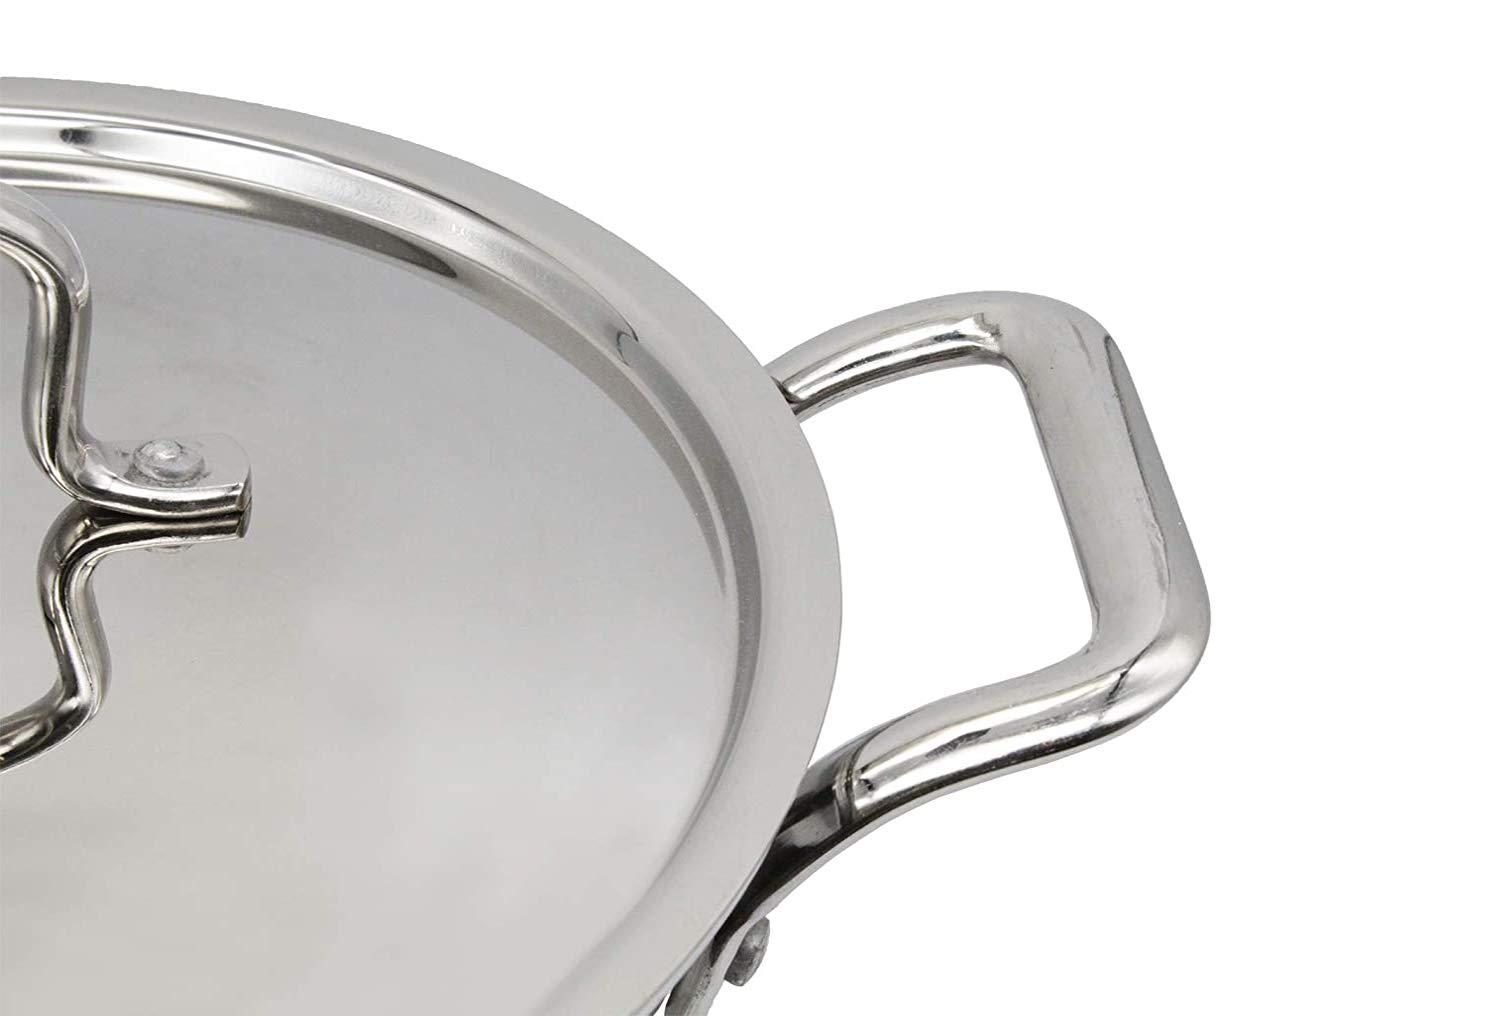 Stainless Steel Kadhai with Lid | Triply | 1.75 Litres | 20cm | 1.24 KG TRILONIUM | Cast Iron Cookware